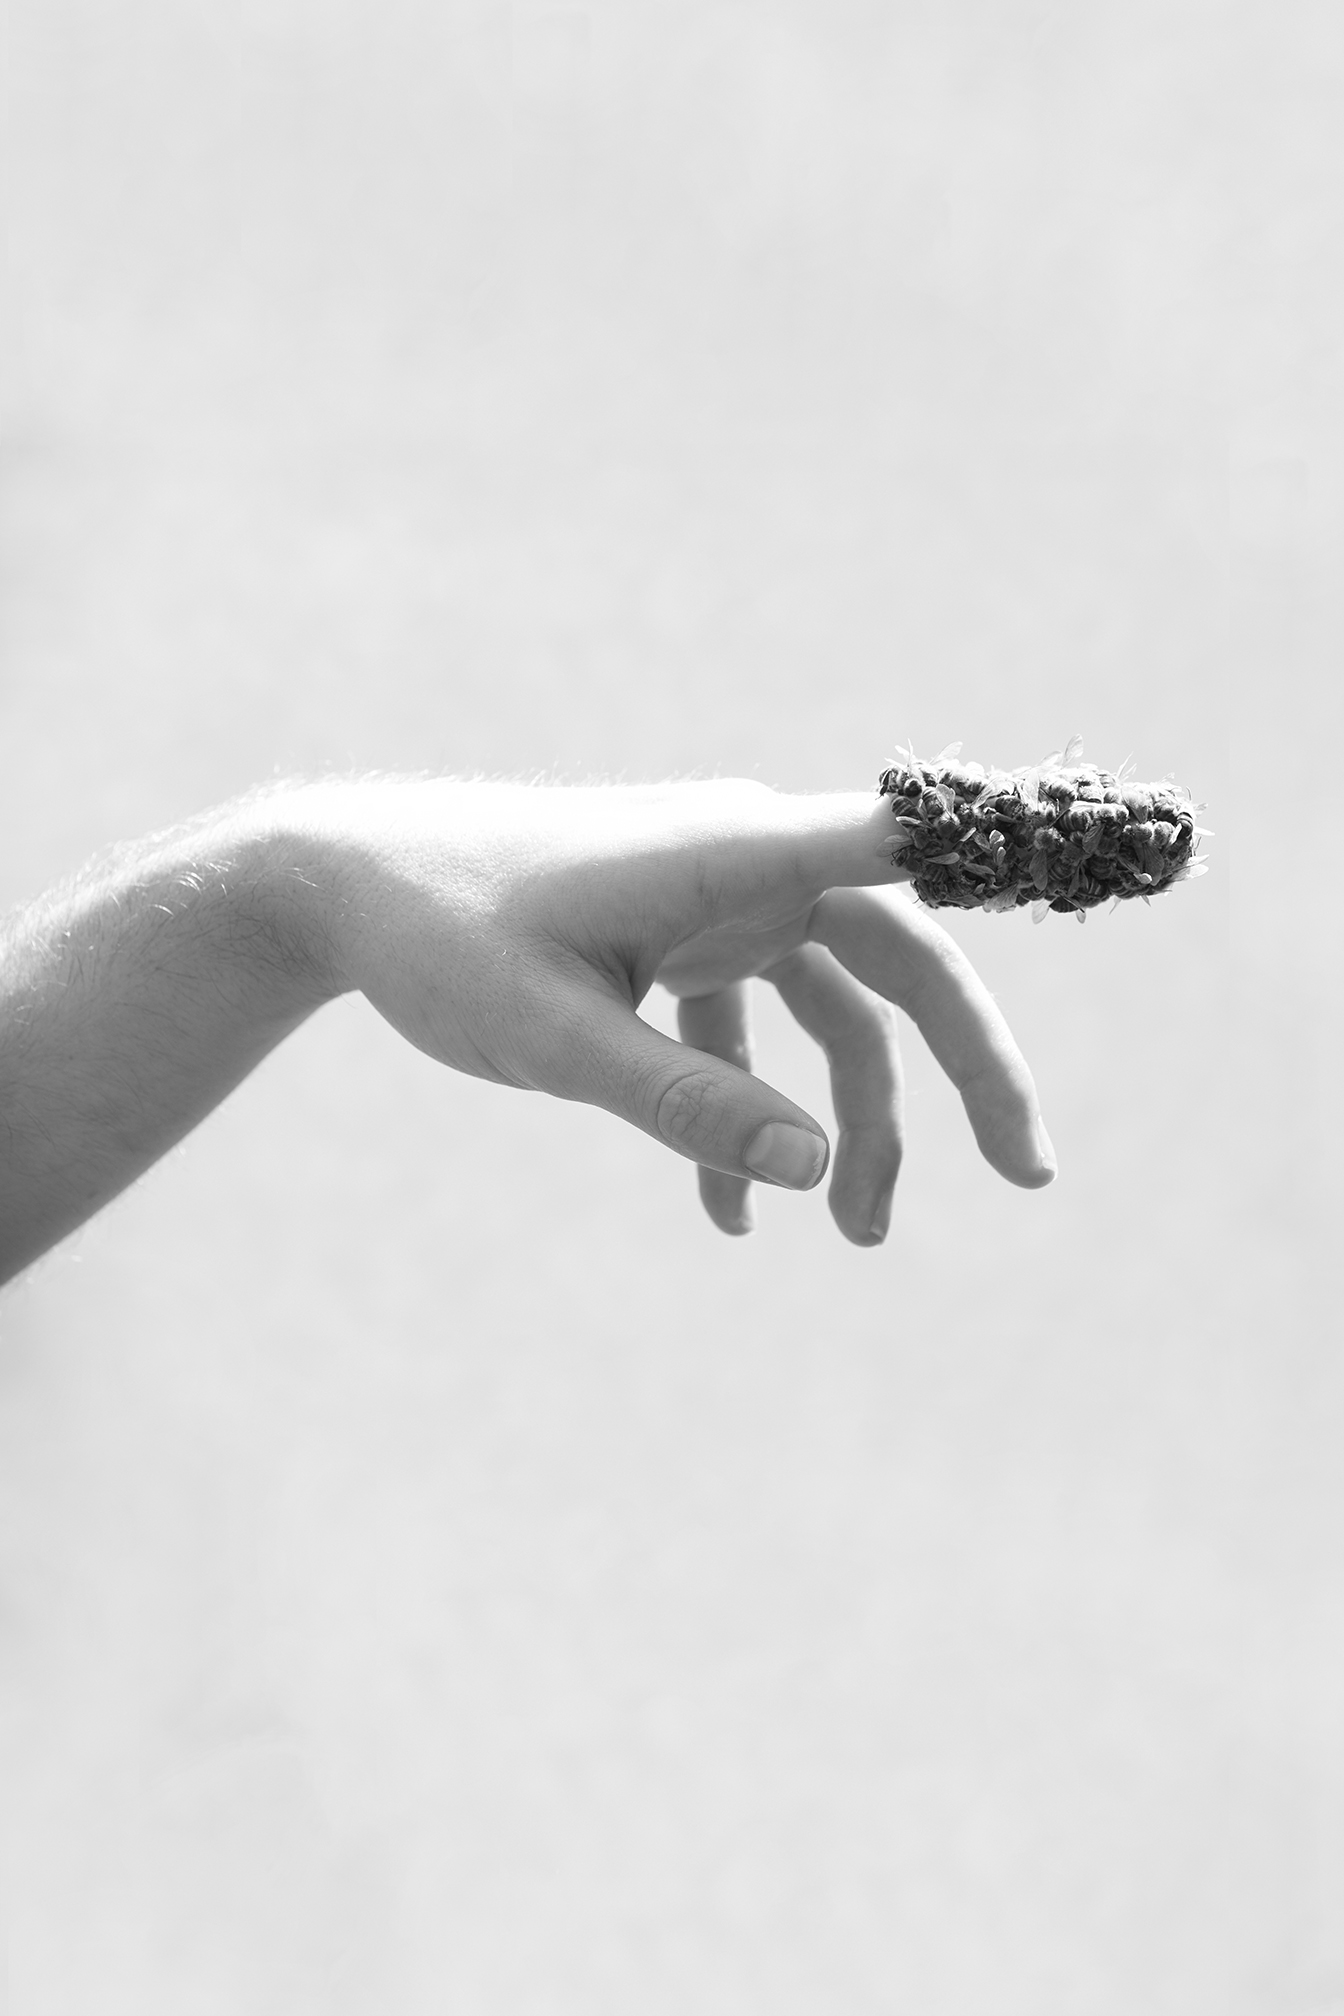 Photo of a hand with the pointer finger  outstretched, covered in bees on a white background